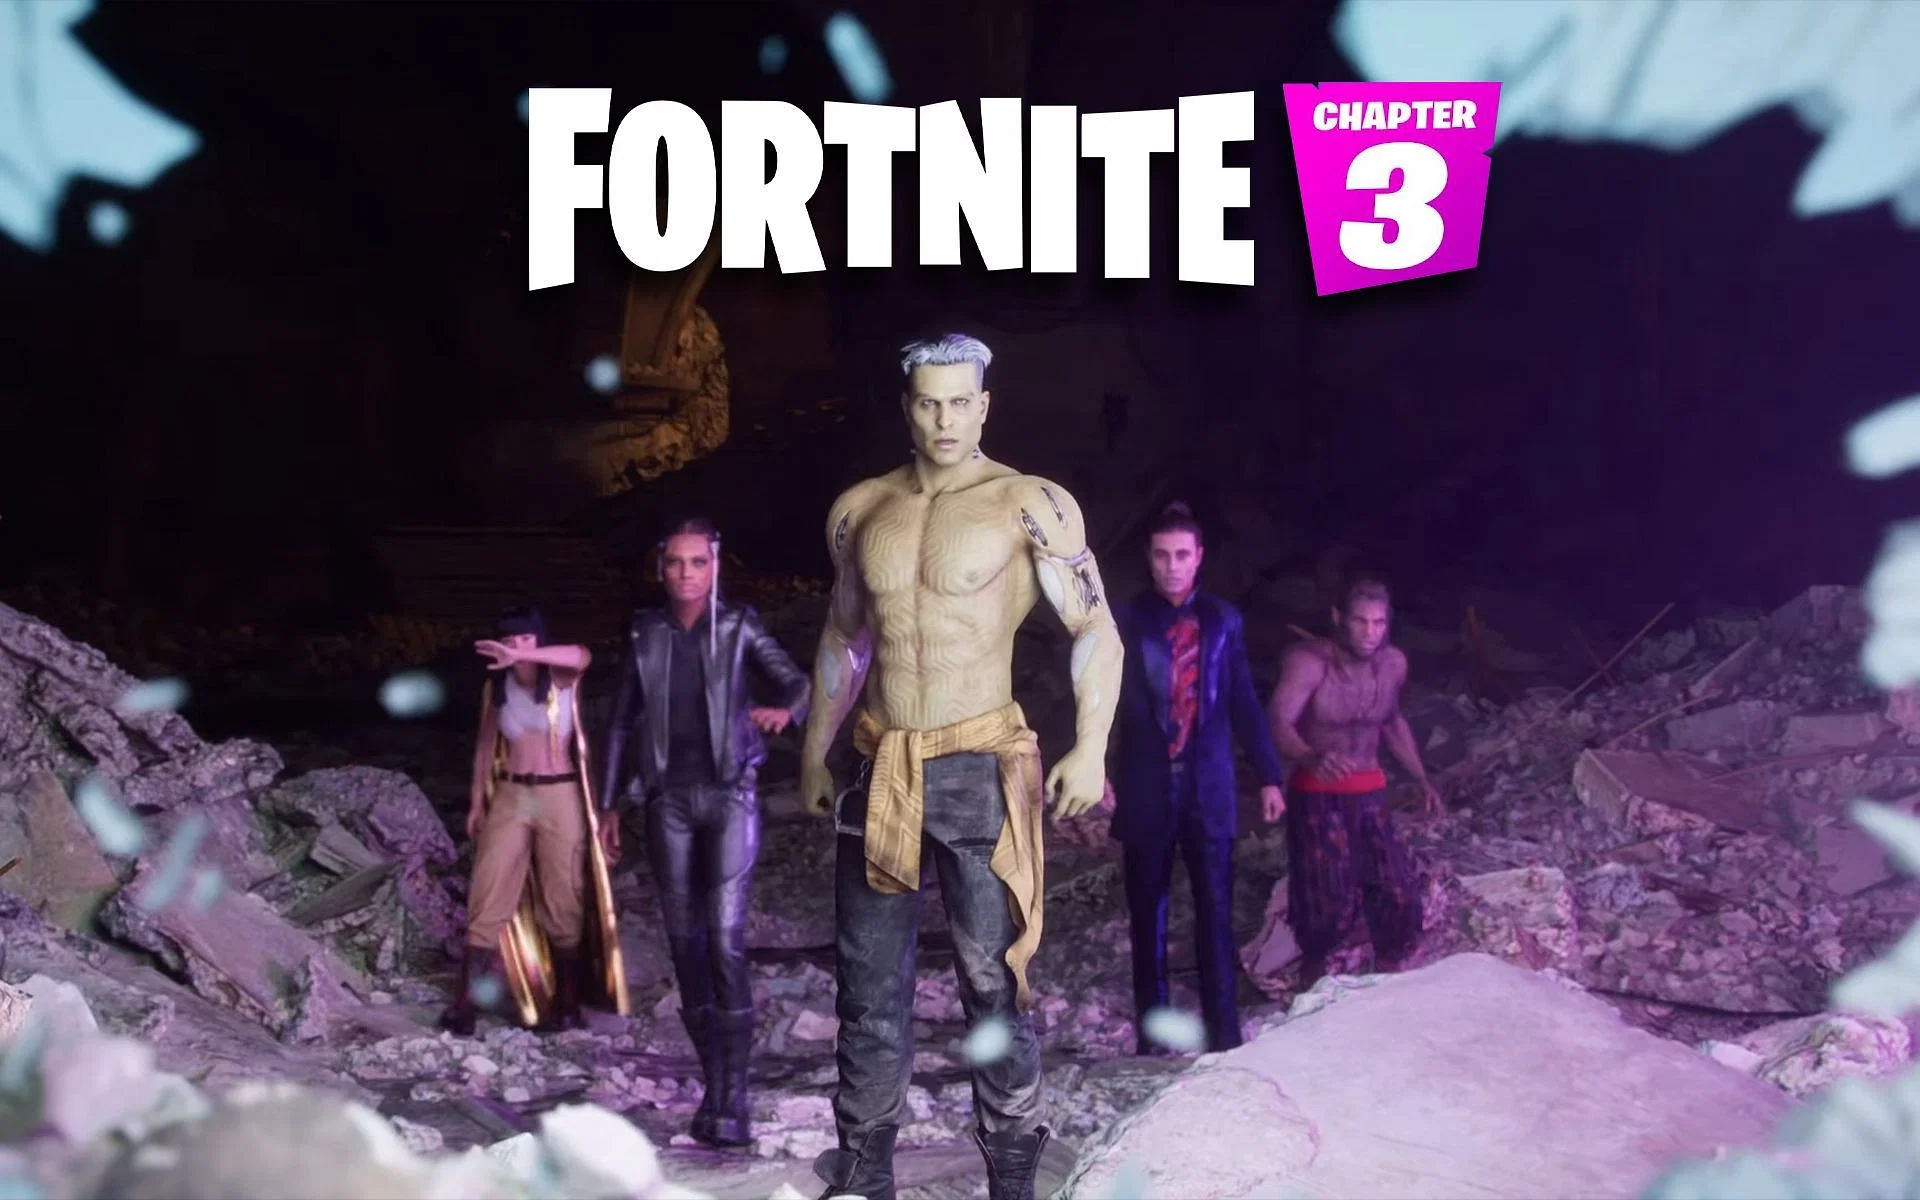 Fortnite Chapter 3 Season 2 teaser shows Kevin the Cube, the Vampire, and more